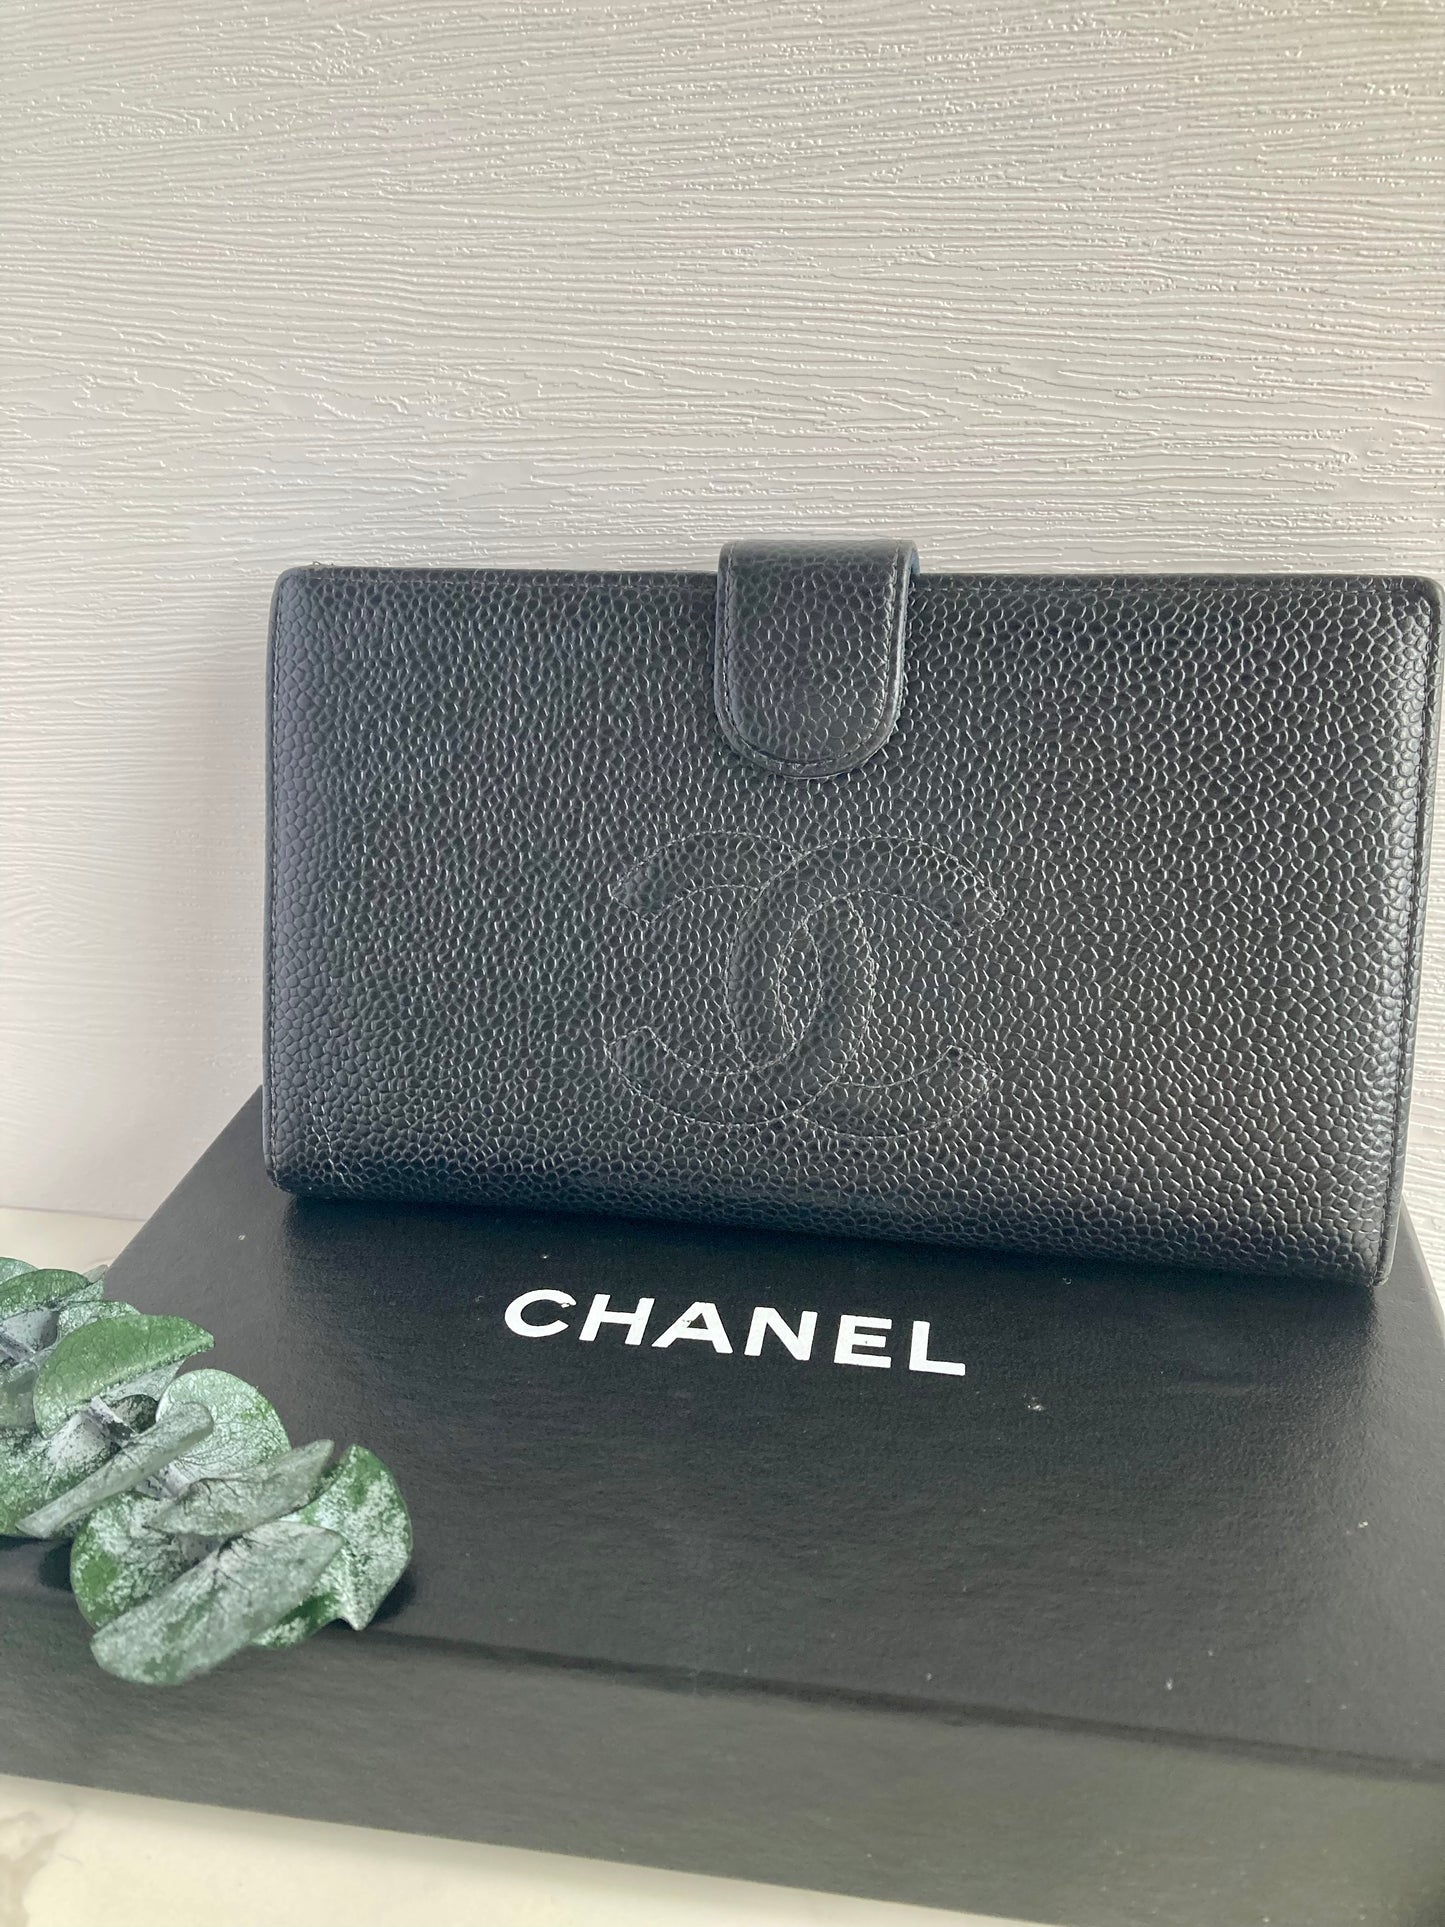 CHANEL Black Caviar Leather Long Wallet with Gold Hardware